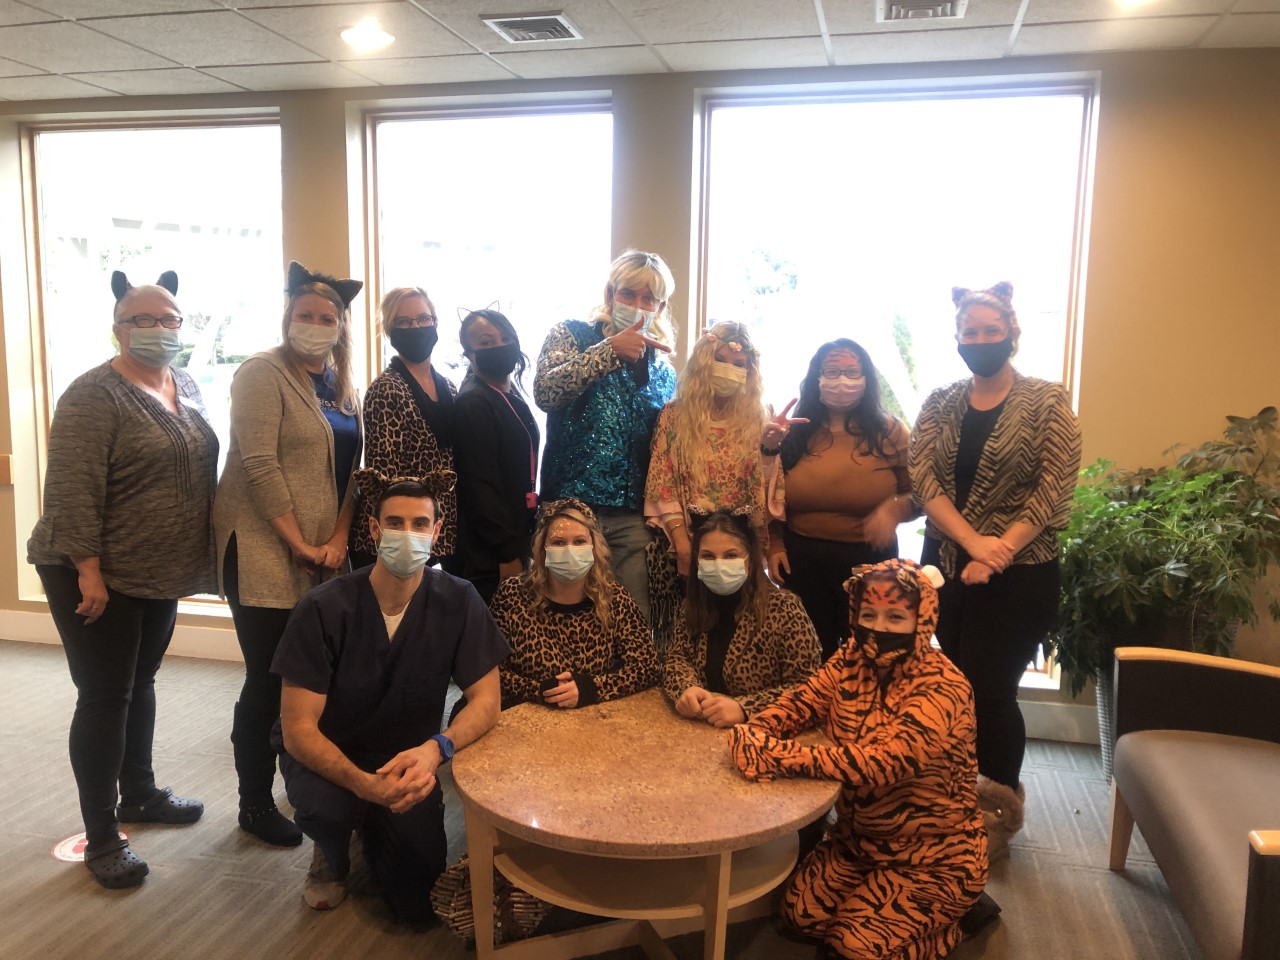 A different kind of Halloween at our Endwell, NY office